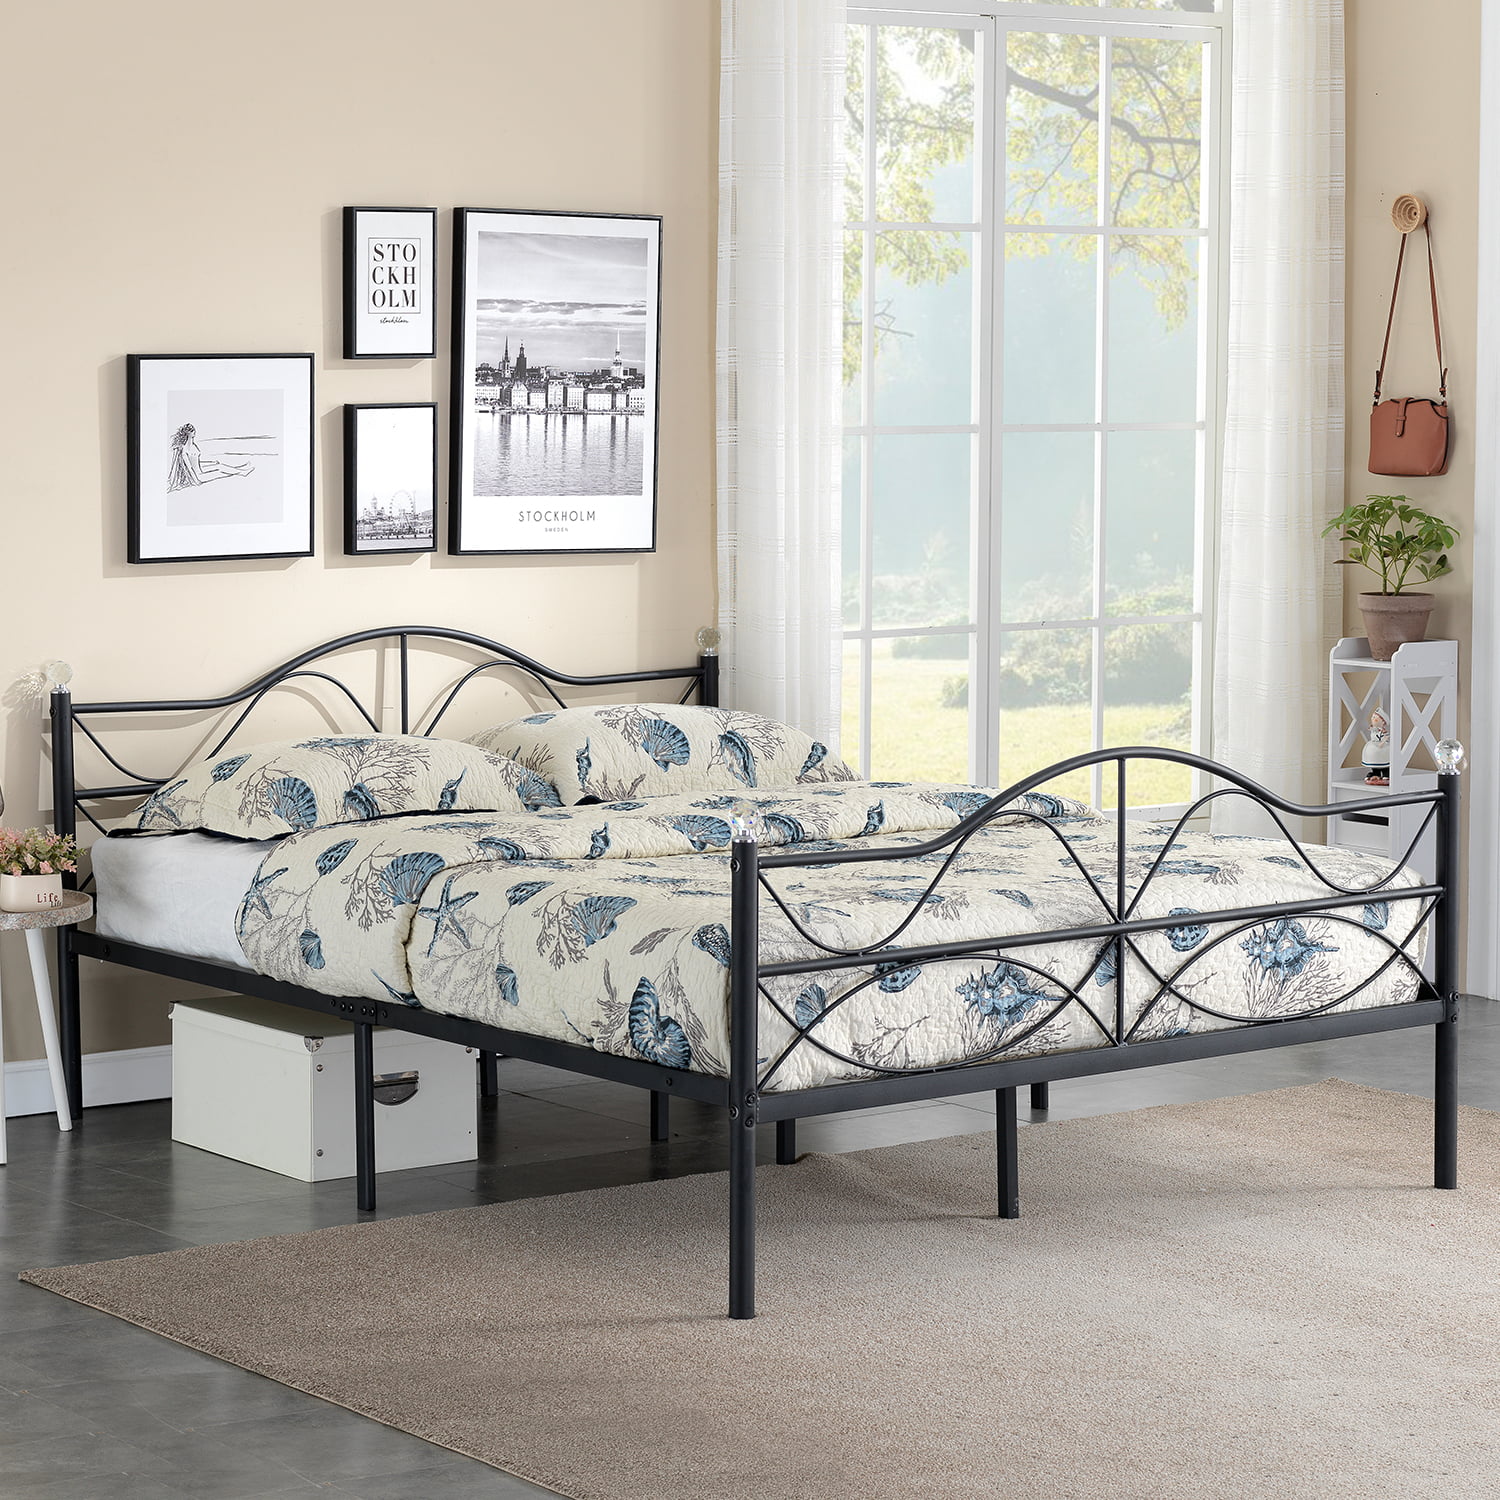 Platform Bed Frame Metal Slats Support, How To Set Up A Bed With Just Headboard